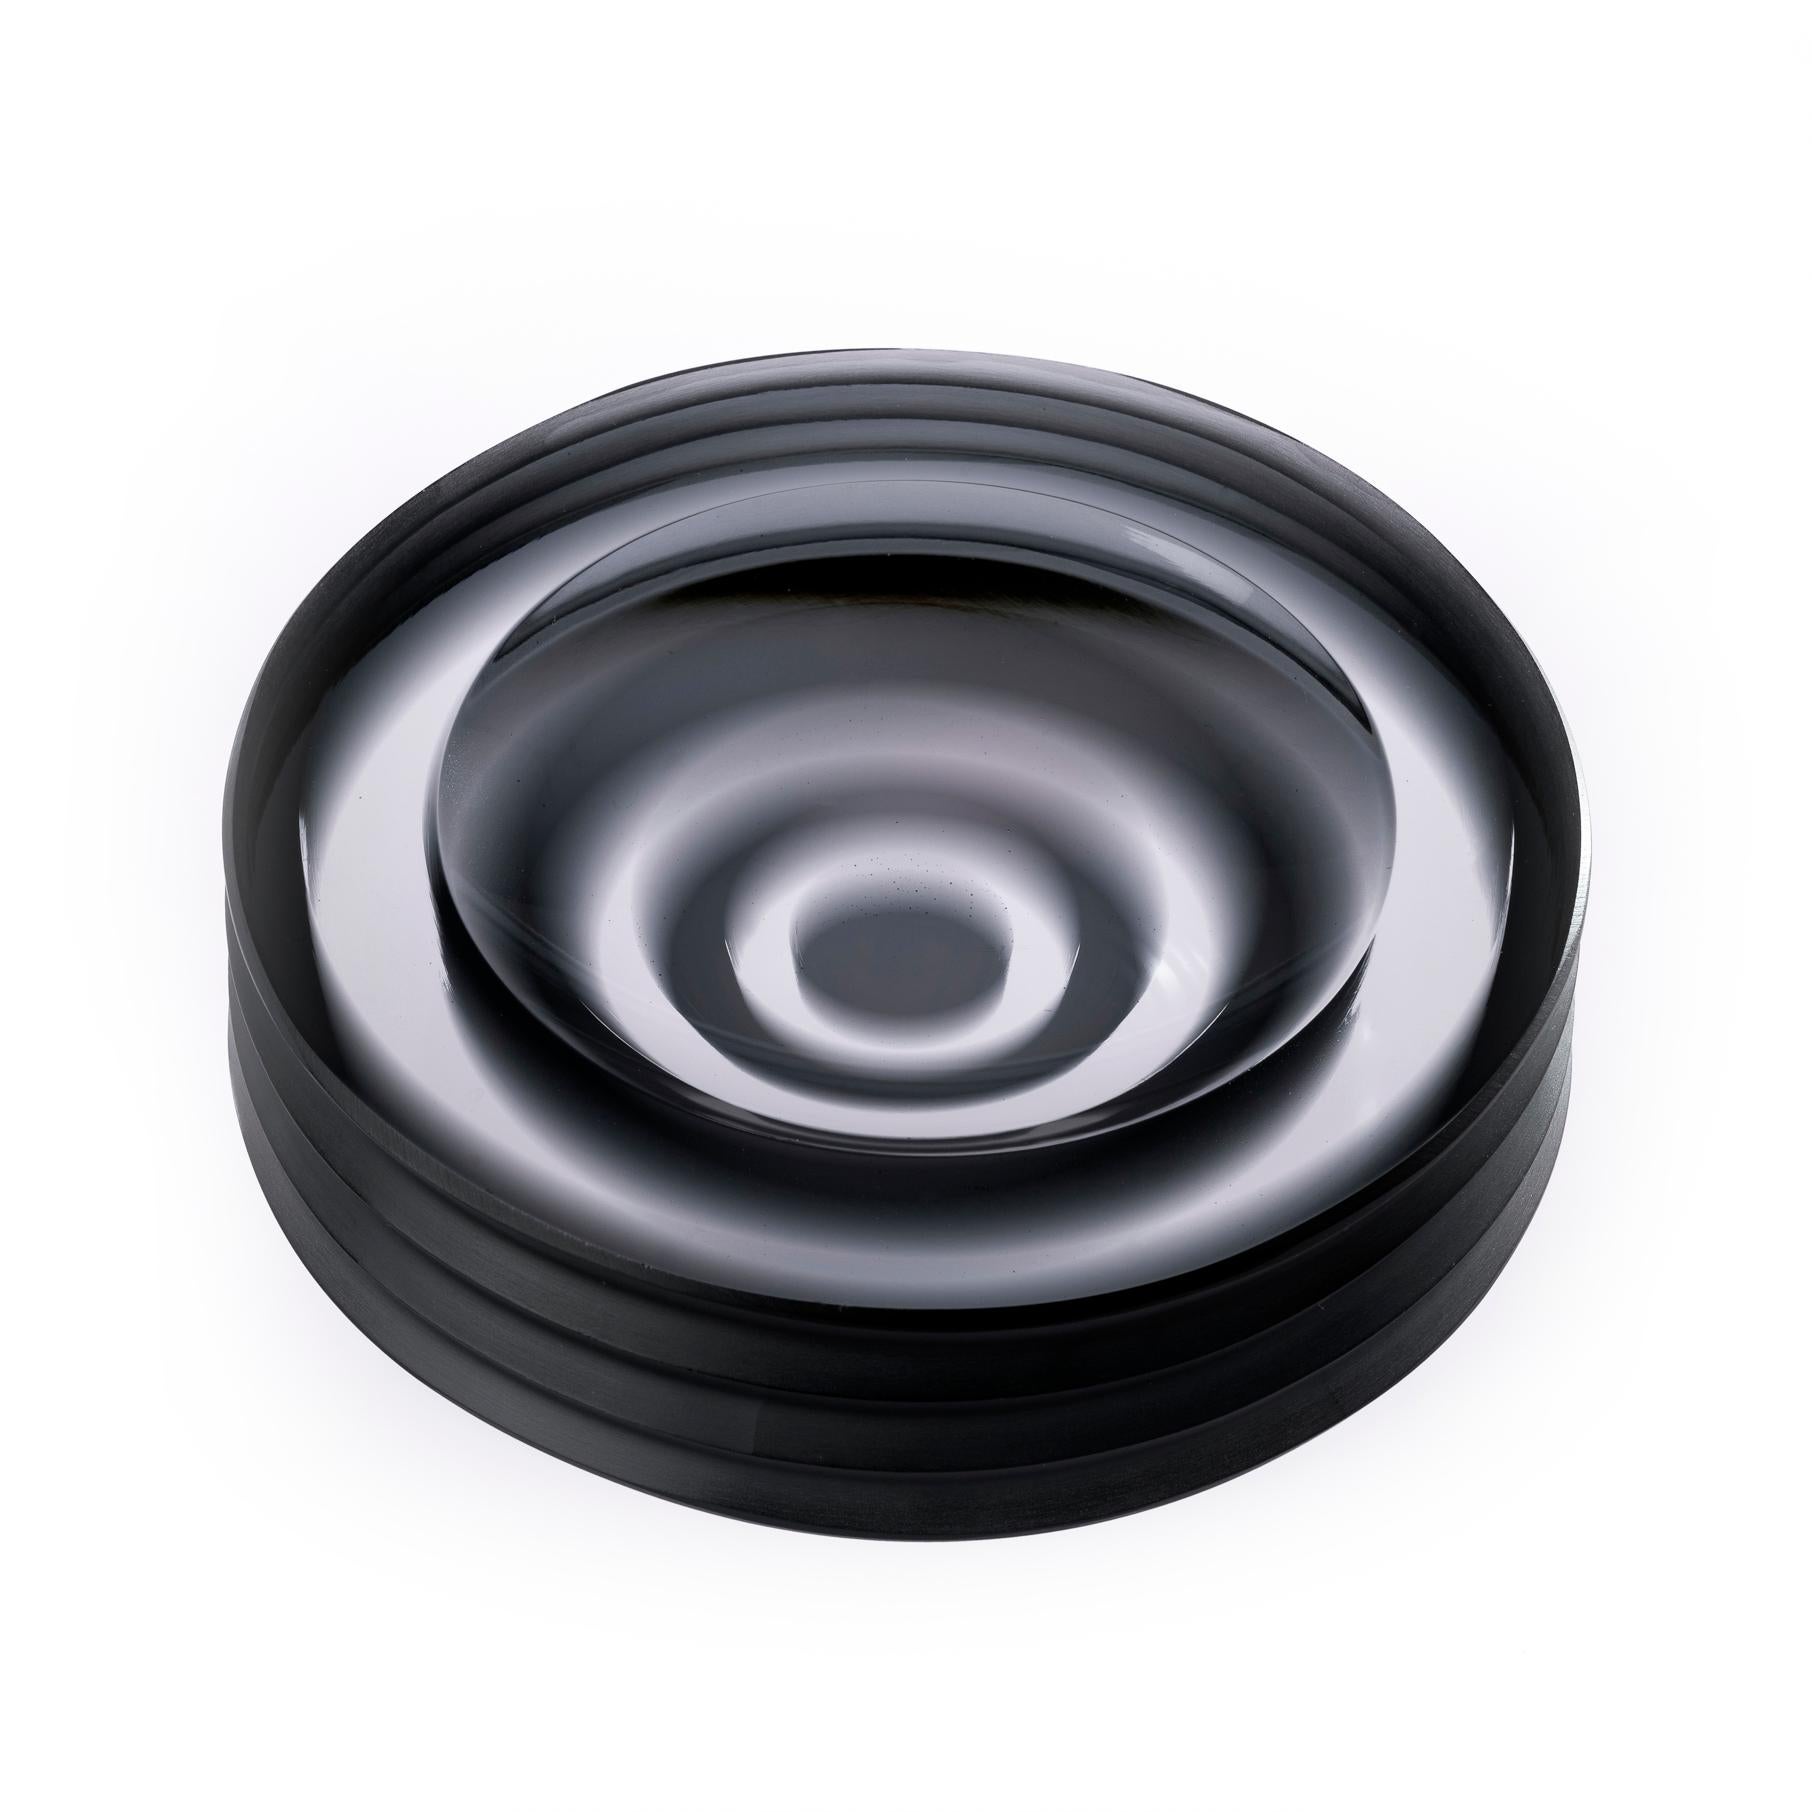 Incisioni Iridi Plissé Ashtray by Purho
Dimensions: D14x H3.5 cm
Materials: Glass
Other colours and dimensions are available.

Purho is a new protagonist of made in Italy design , a work of synthesis, a research that has lasted for years, an